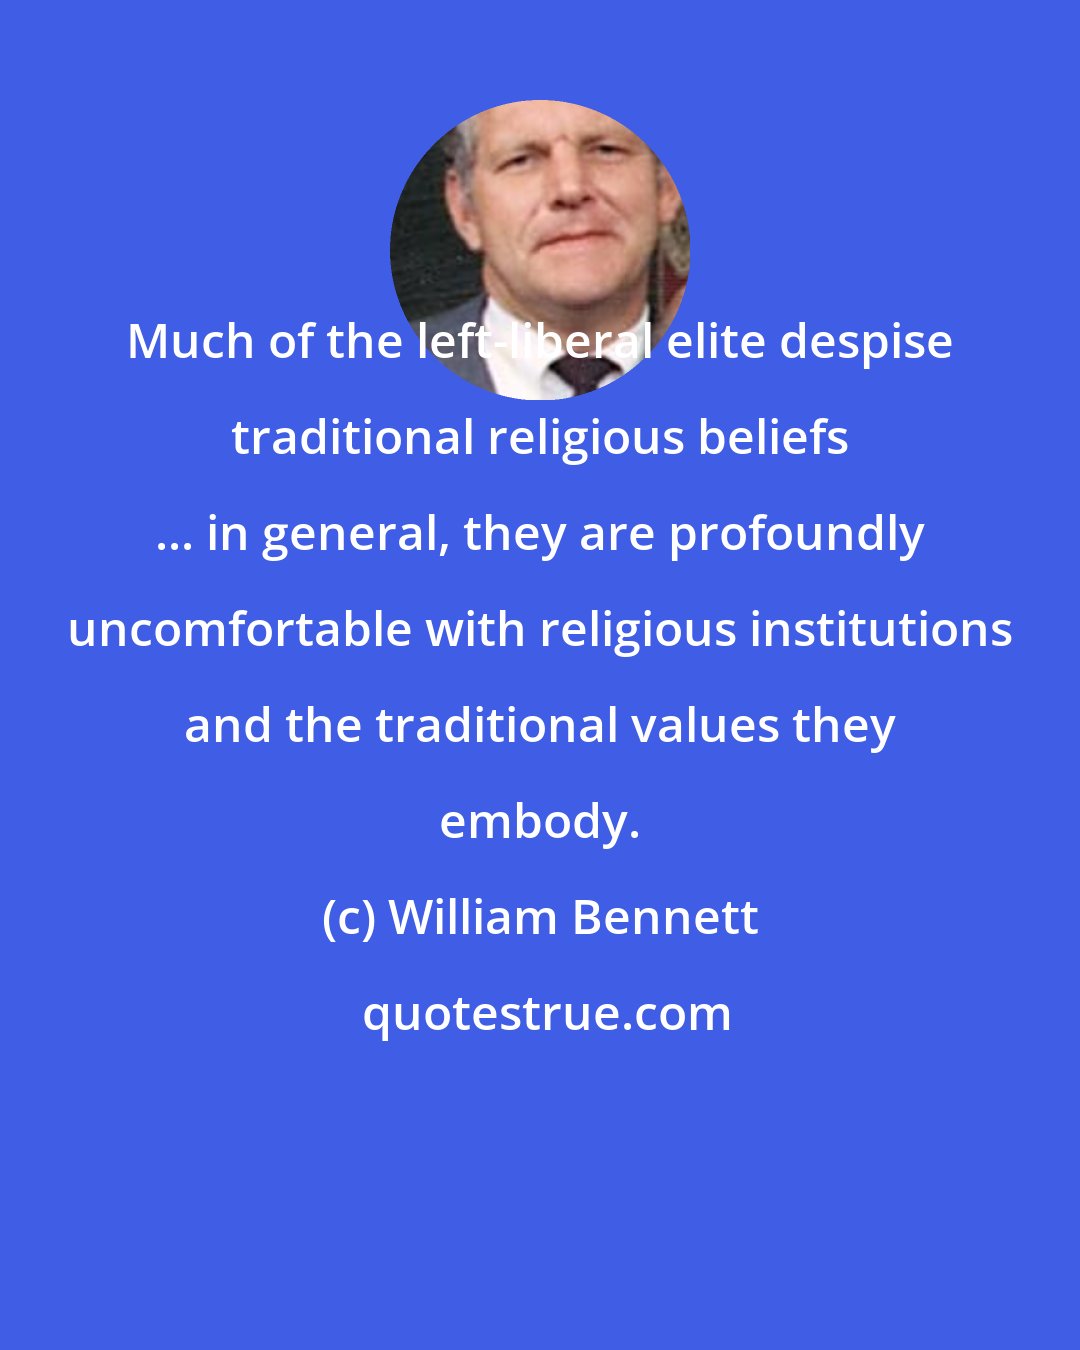 William Bennett: Much of the left-liberal elite despise traditional religious beliefs ... in general, they are profoundly uncomfortable with religious institutions and the traditional values they embody.